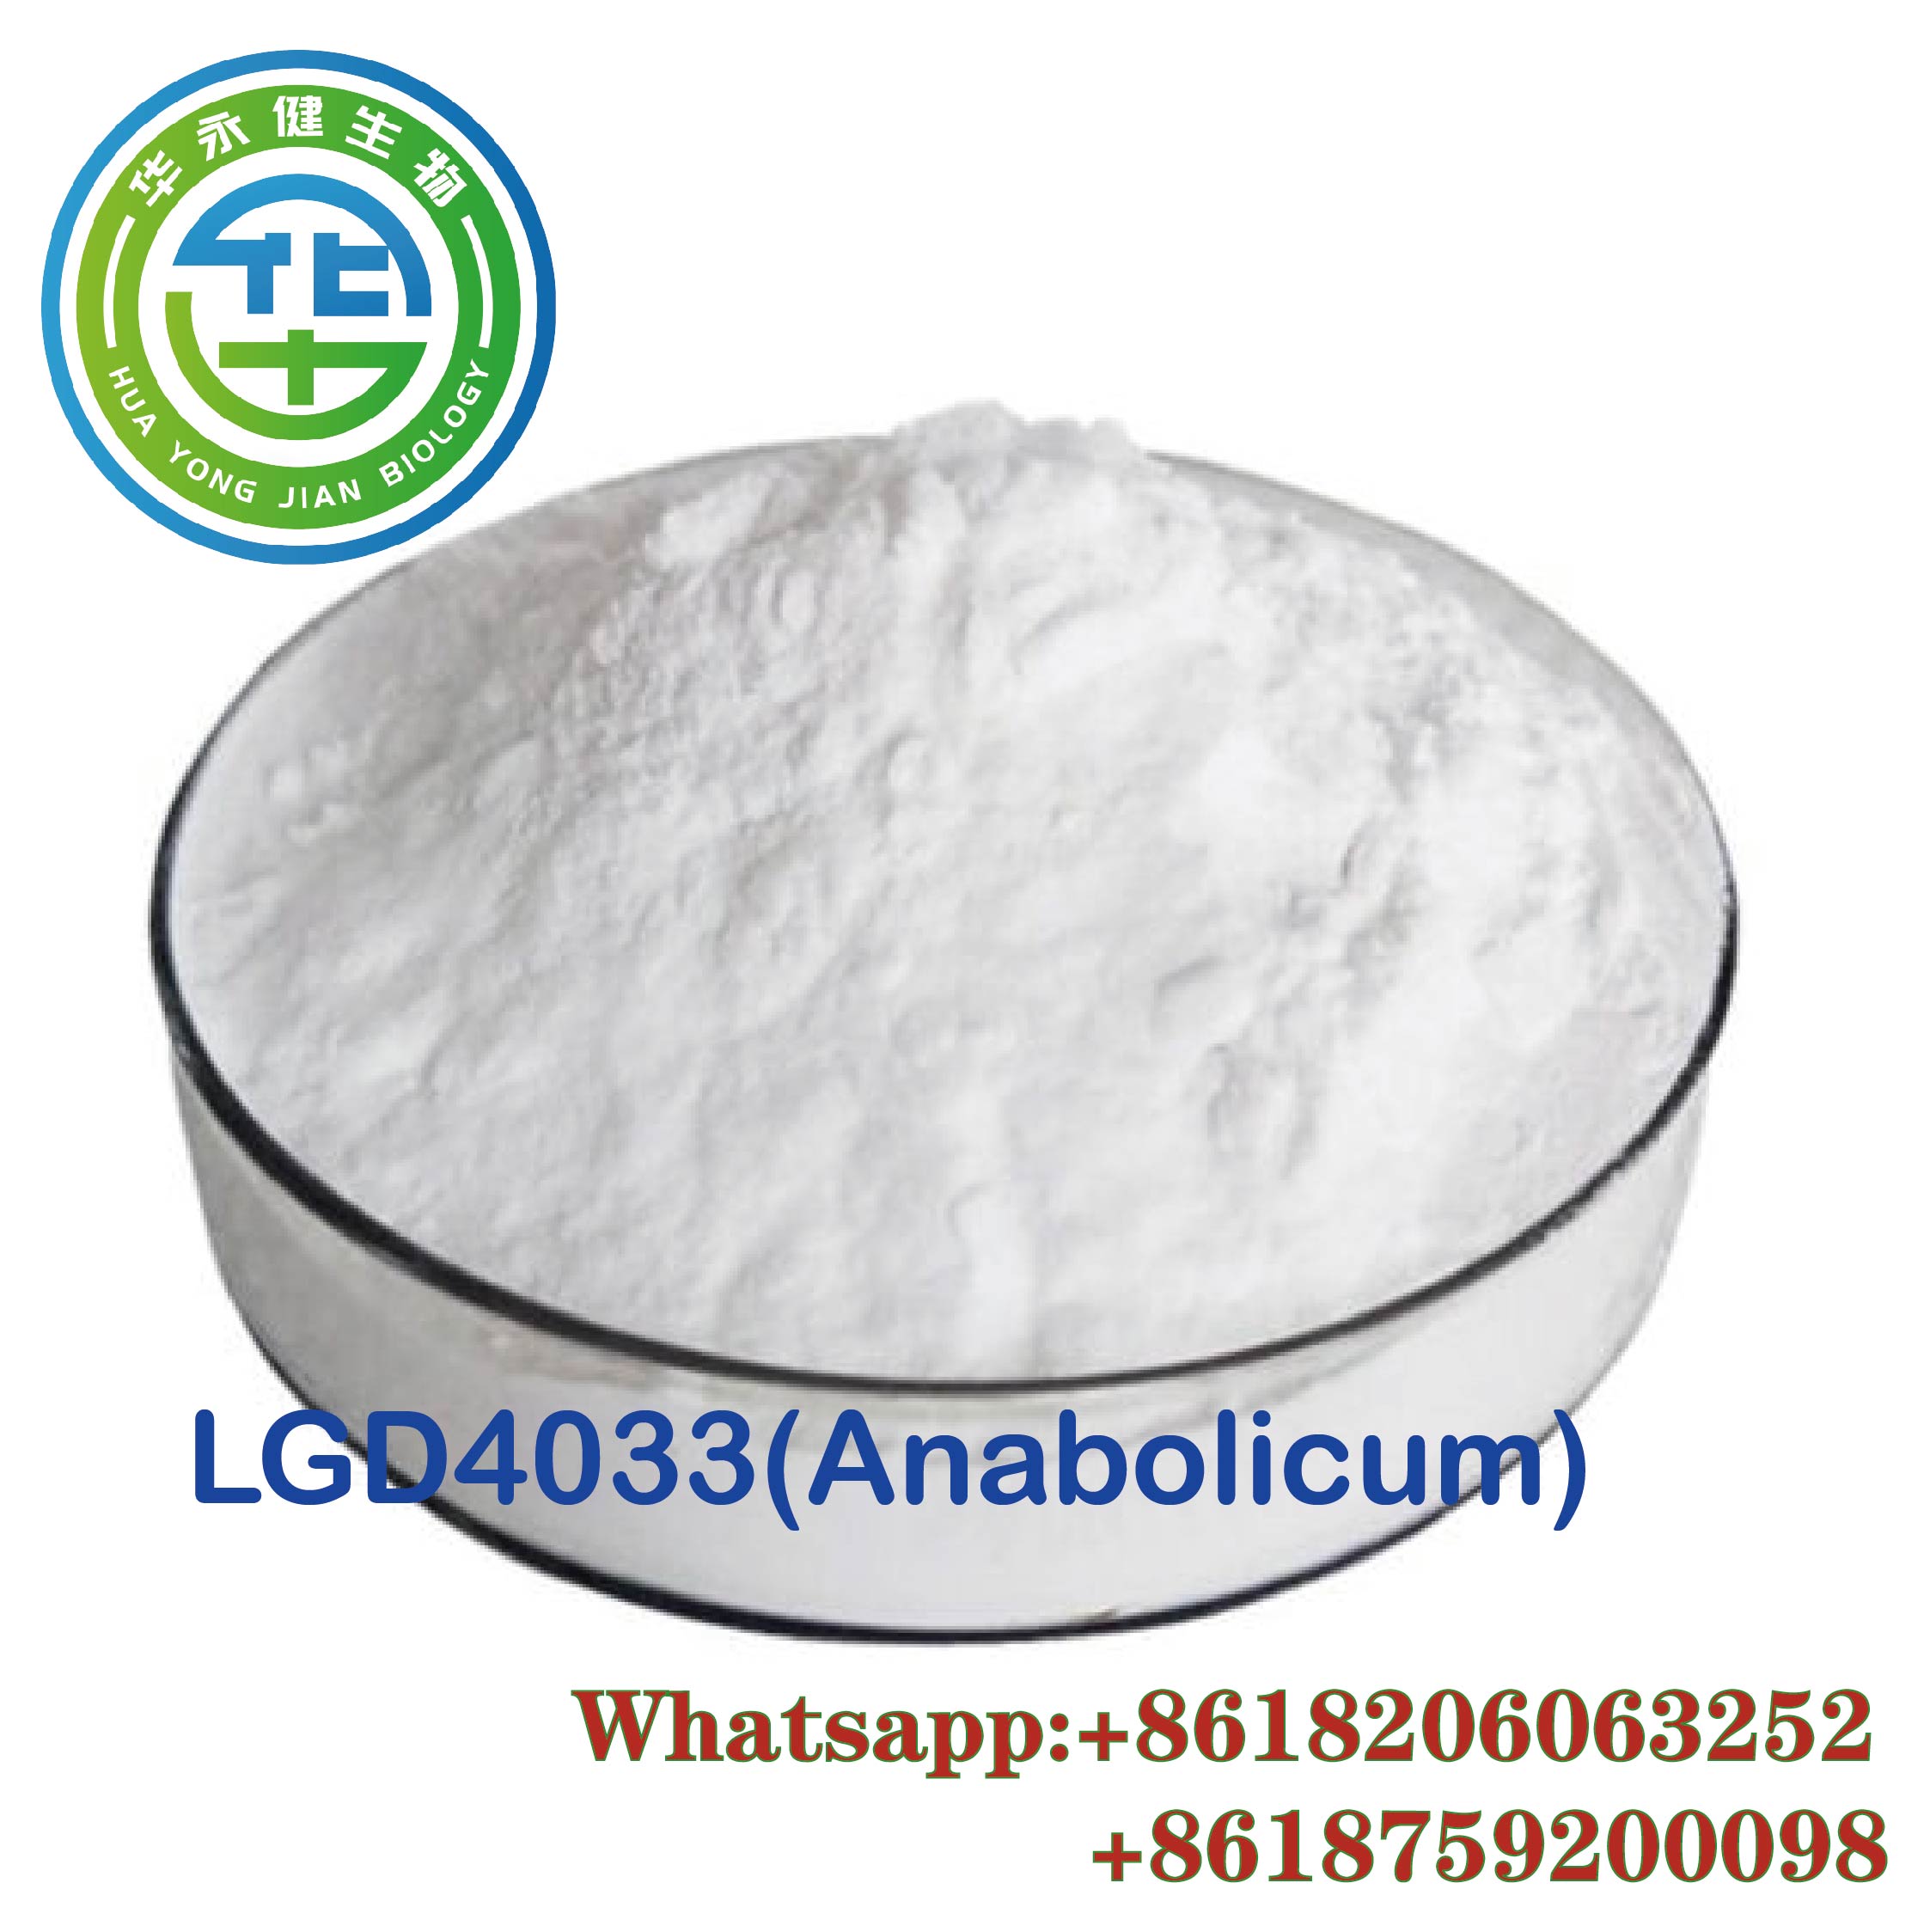 99 % Pure Sarms  Bodybuilding Supplements Ligandrol LGD-4033 For Muscle Gaining CAS: 1165910-22-4 